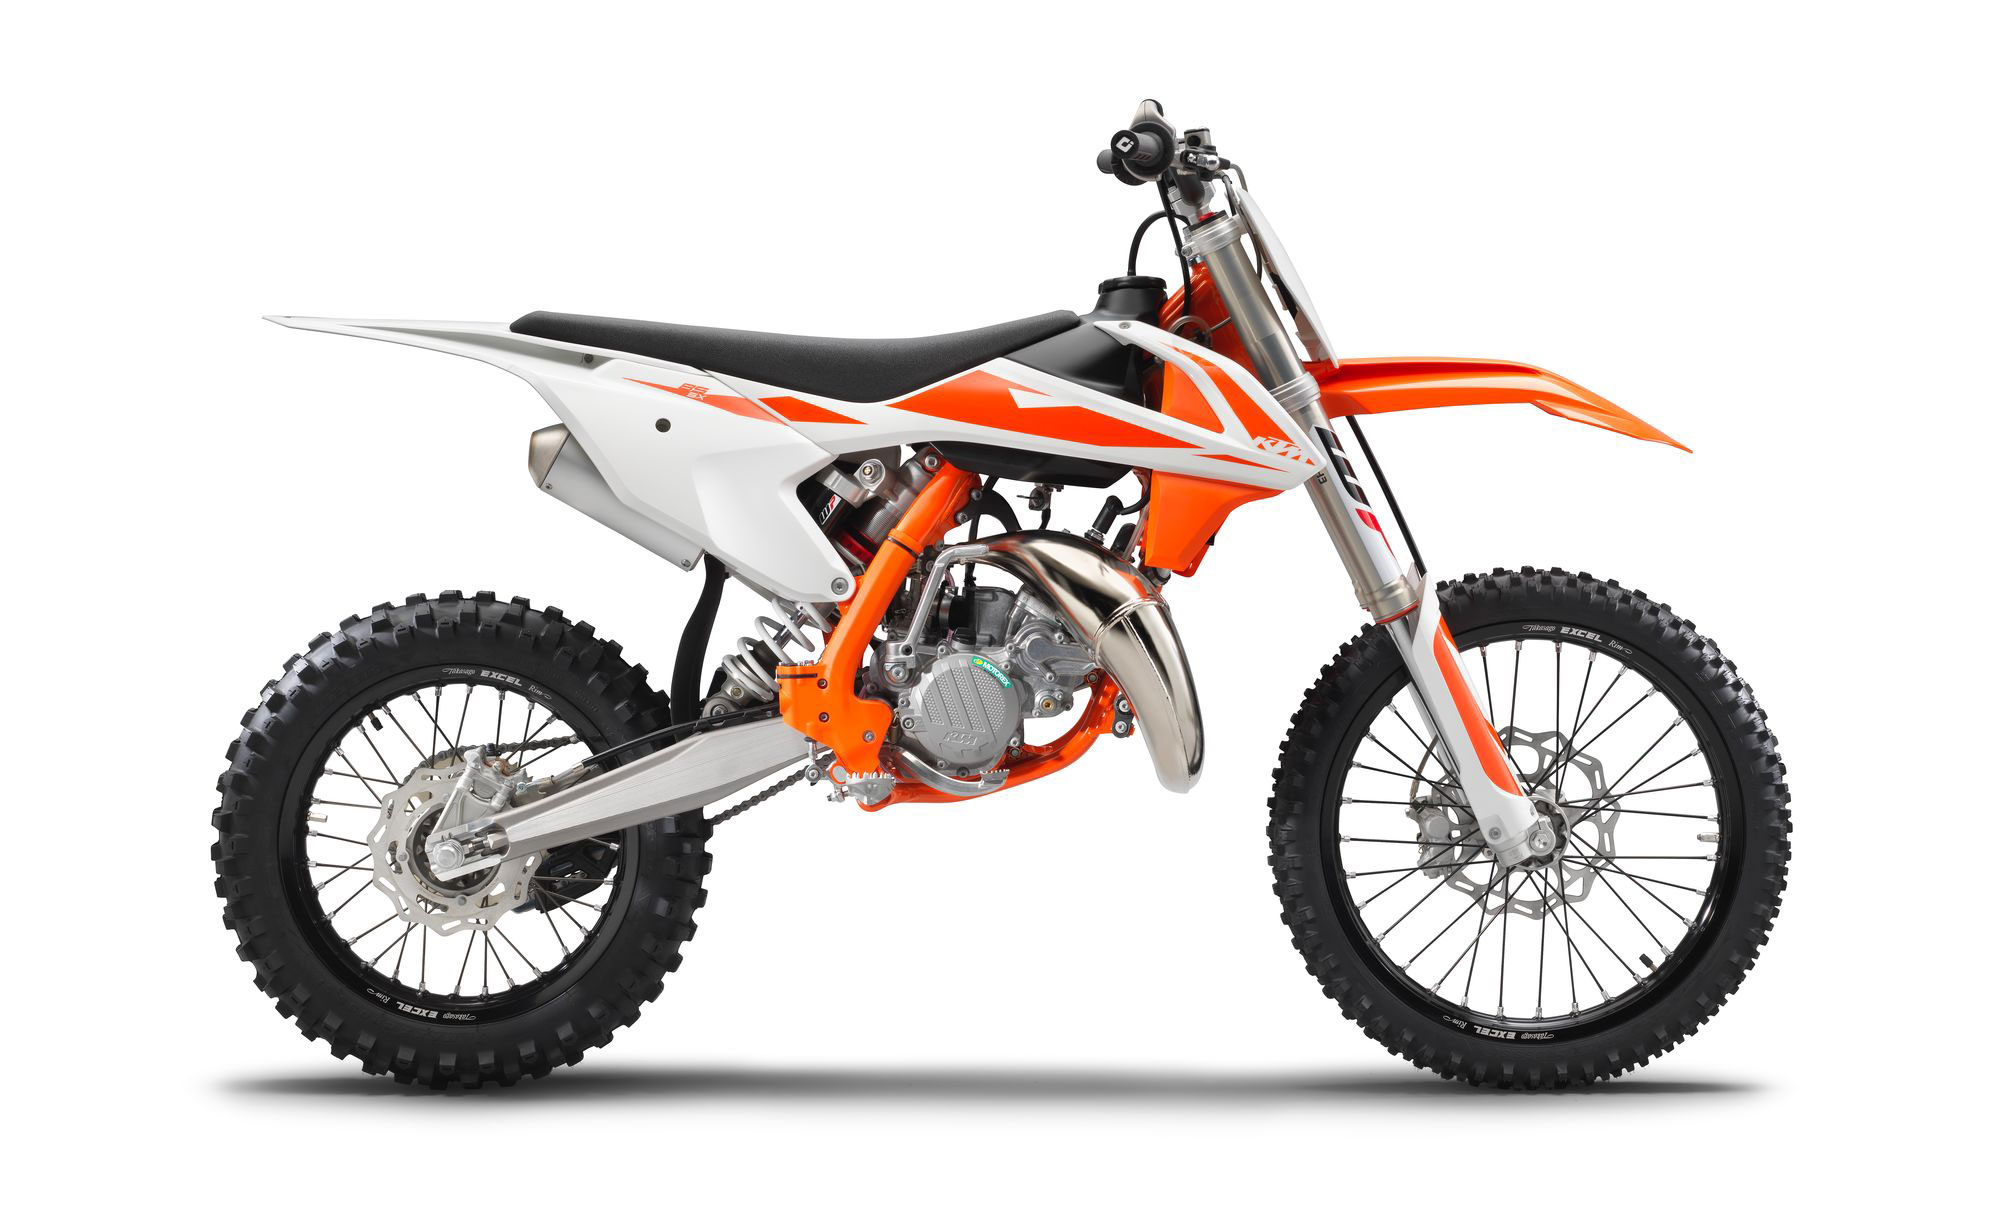 2019 KTM 85 SX 17/14 Guide • Total Motorcycle